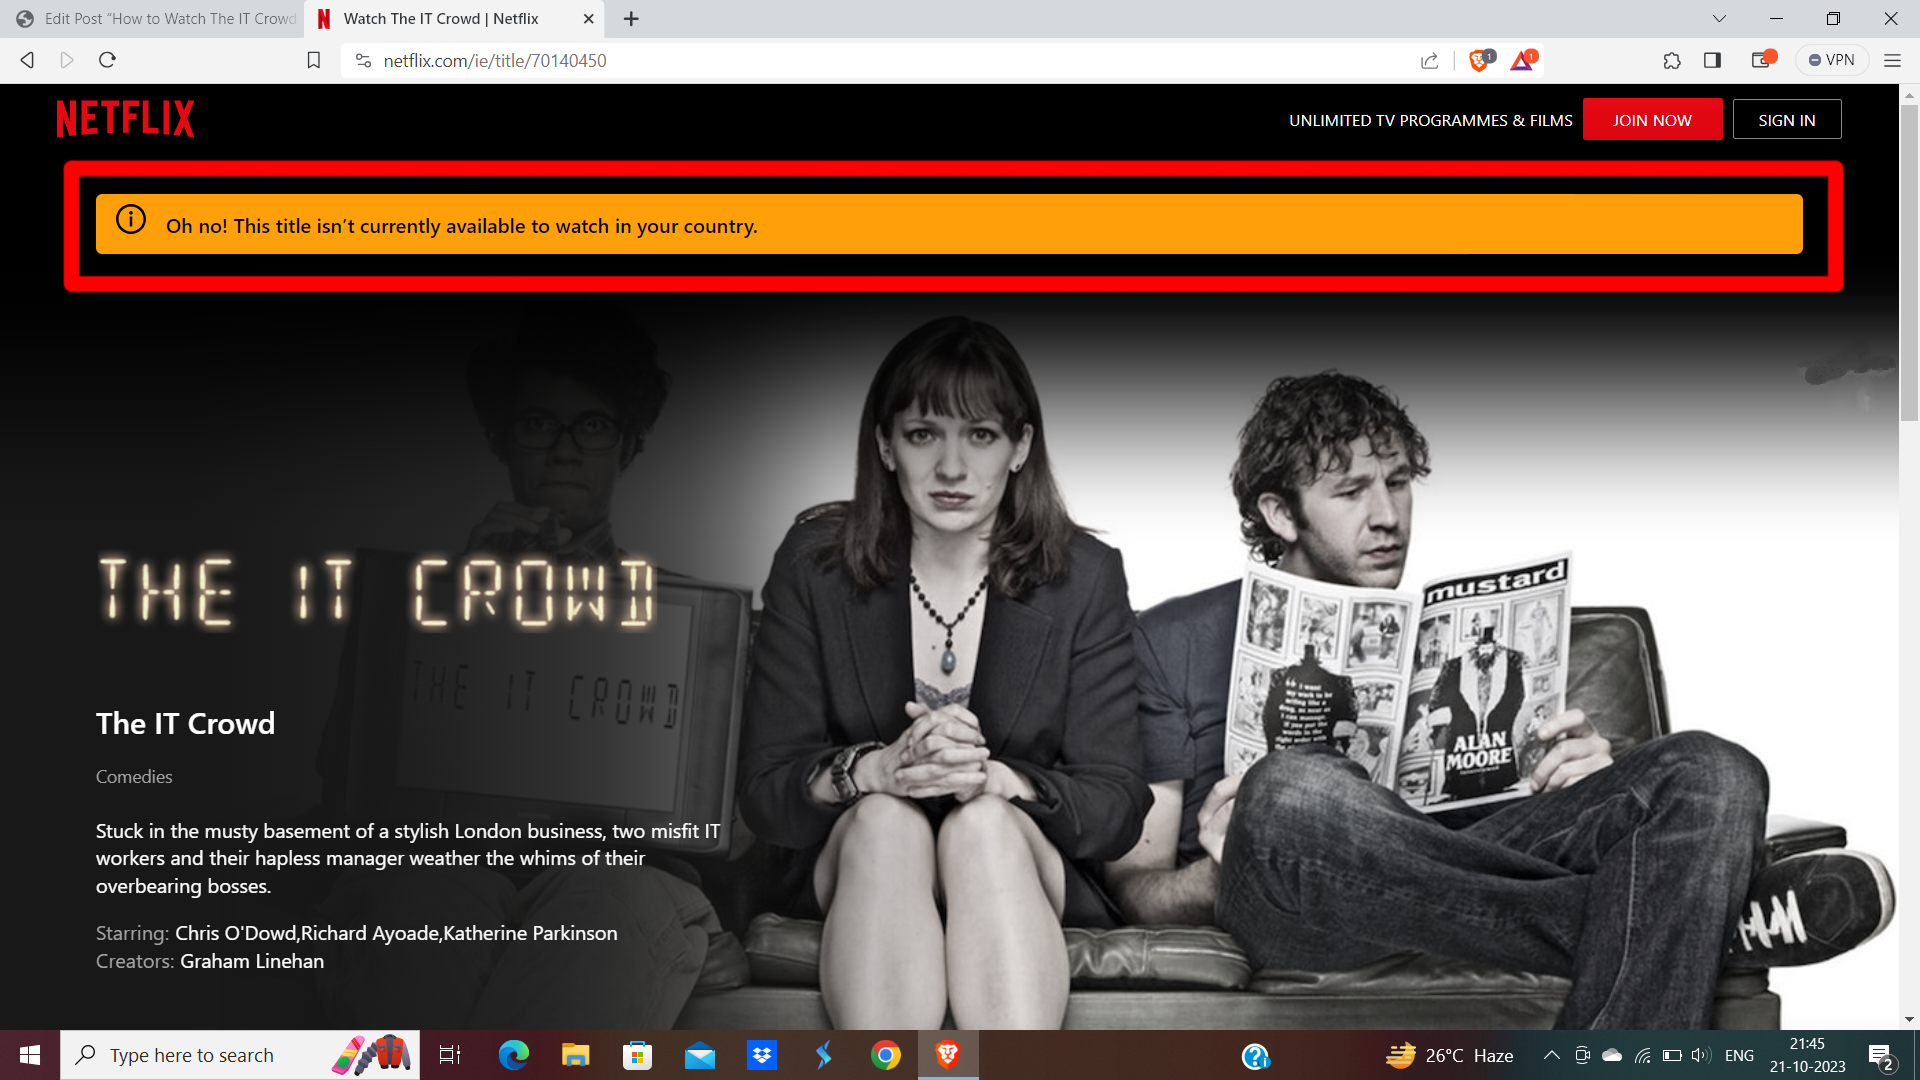 The IT Crowd is not available on Netflix